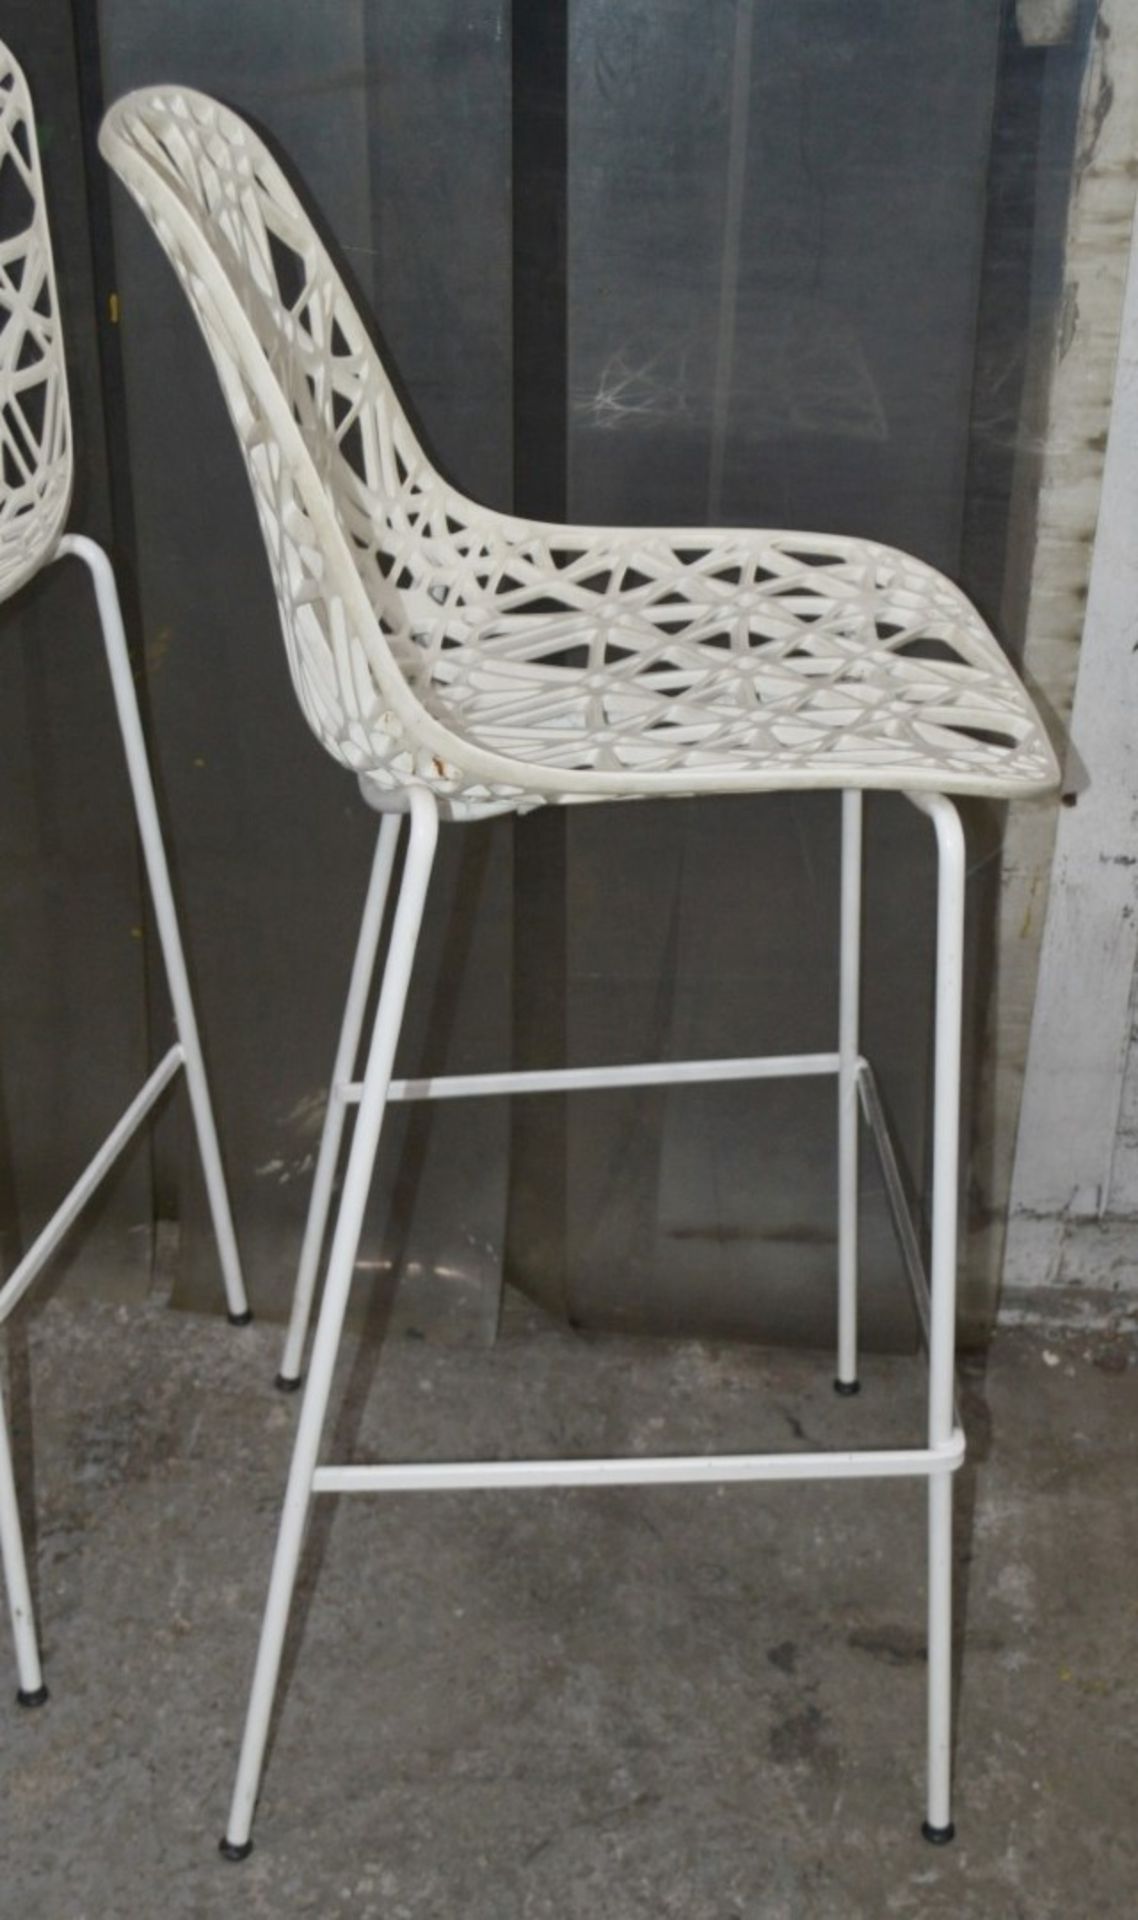 4 x Commercial Outdoor Bar Stools In White - Dimensions: H108 x W52 x D50cm, Seat Height 73cm - Image 5 of 5